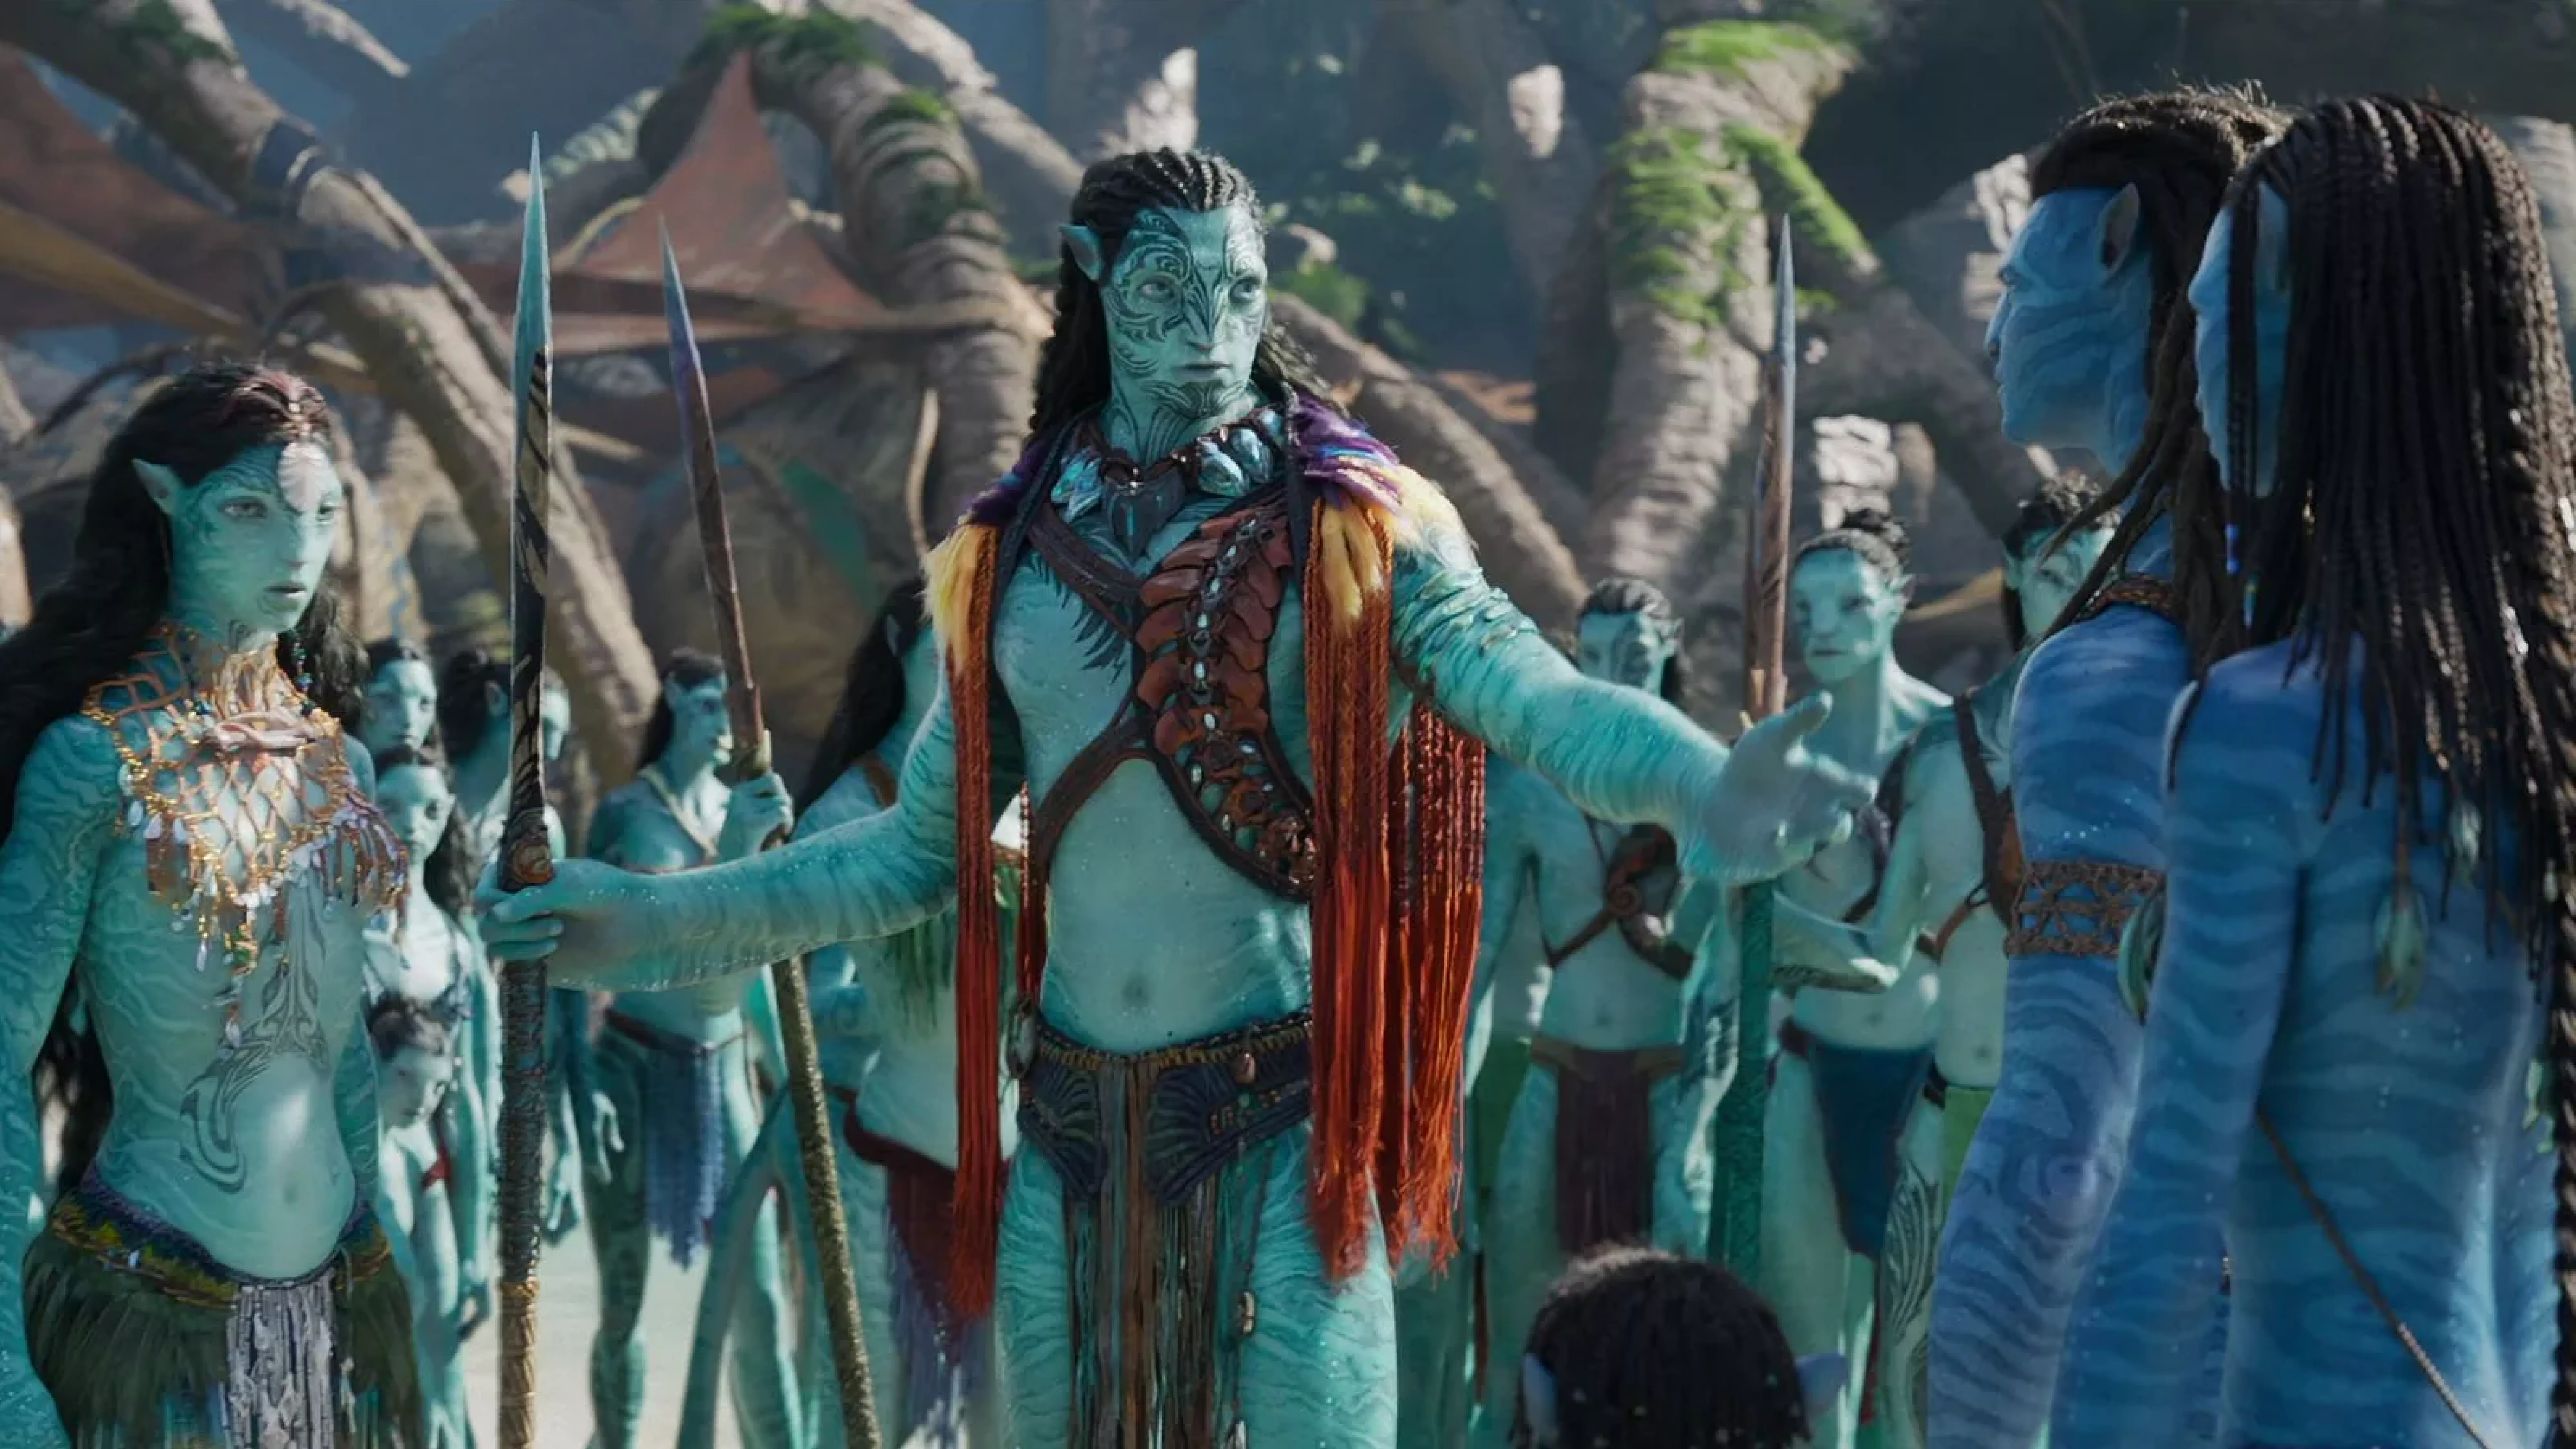 PHOTOS Take a Look BehindtheScenes for the Filming of Avatar 2   AllEarsNet